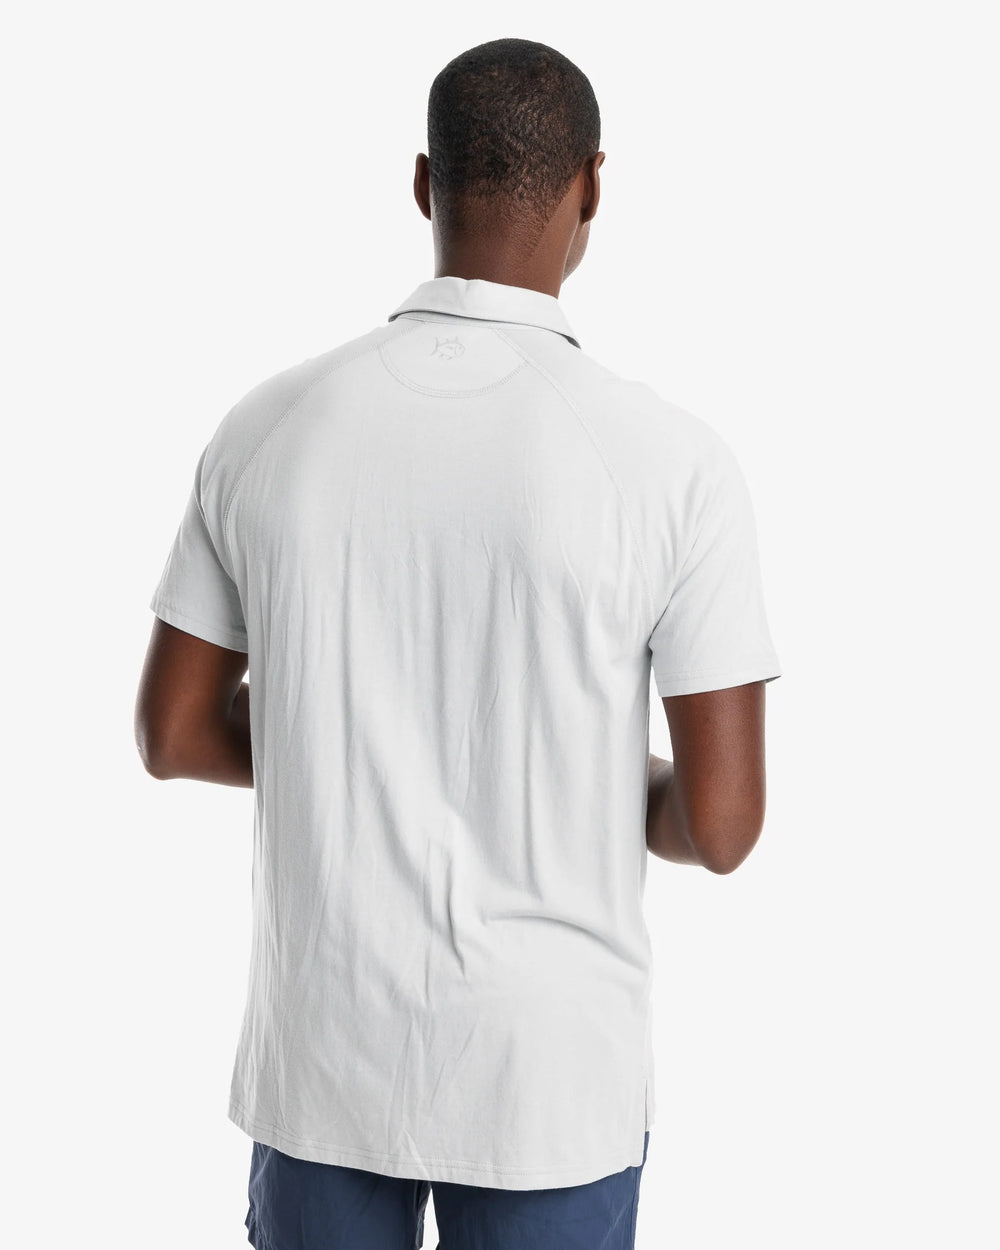 The model back view of the Men's Racquet Performance Polo Shirt by Southern Tide - Seagull Grey